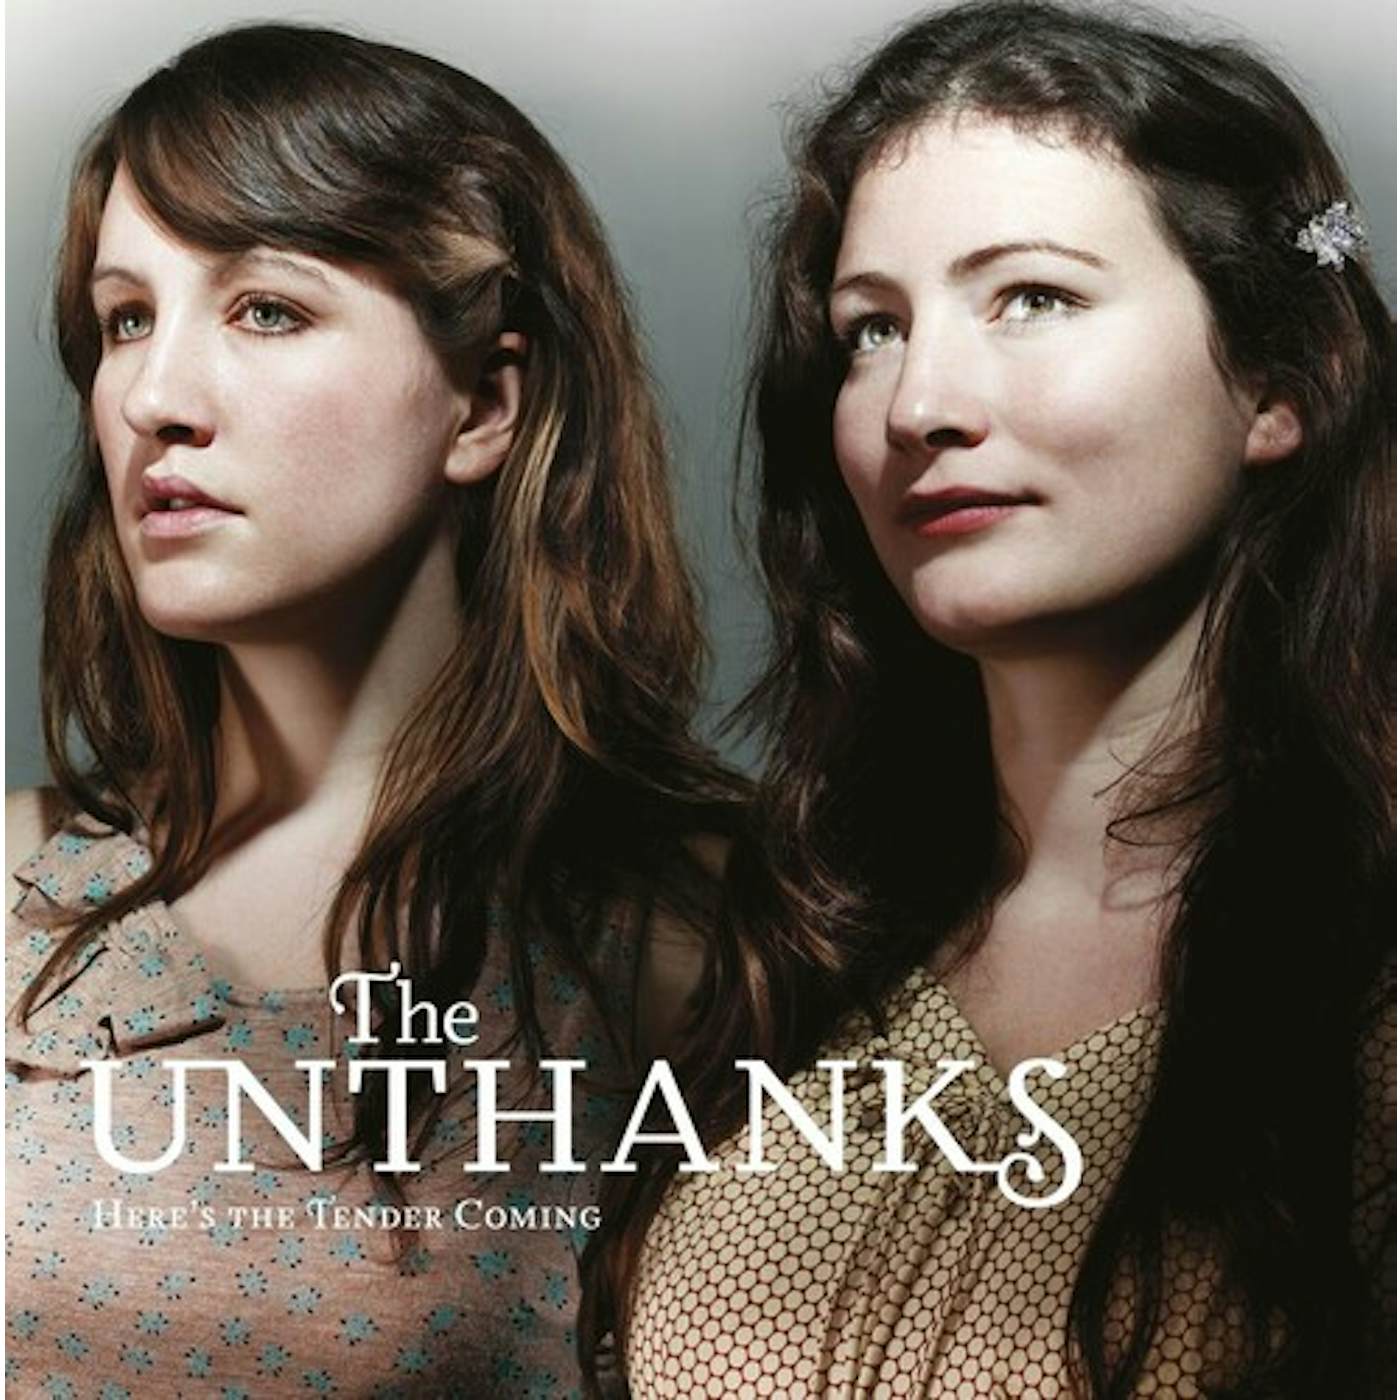 The Unthanks HERE'S THE TENDER COMING Vinyl Record